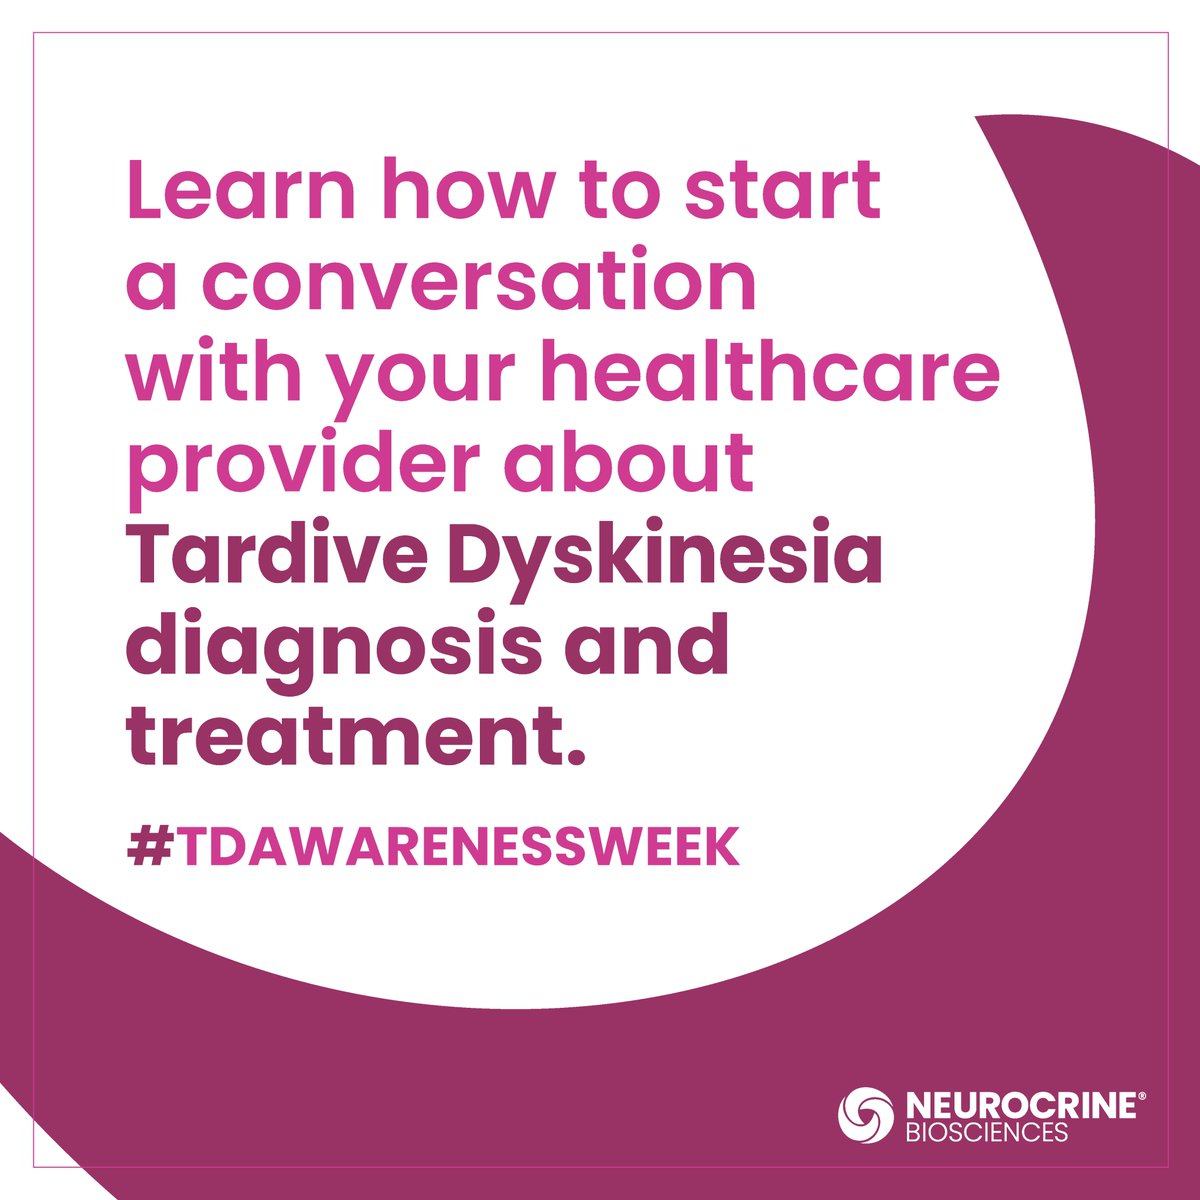 Proactive recognition and treatment of TD can make a positive impact on the lives of many people experiencing mental illness. TD is a chronic condition that is unlikely to improve without treatment. There are U.S. FDA-approved treatment options for TD. #TDAwarenessWeek #Screen4TD